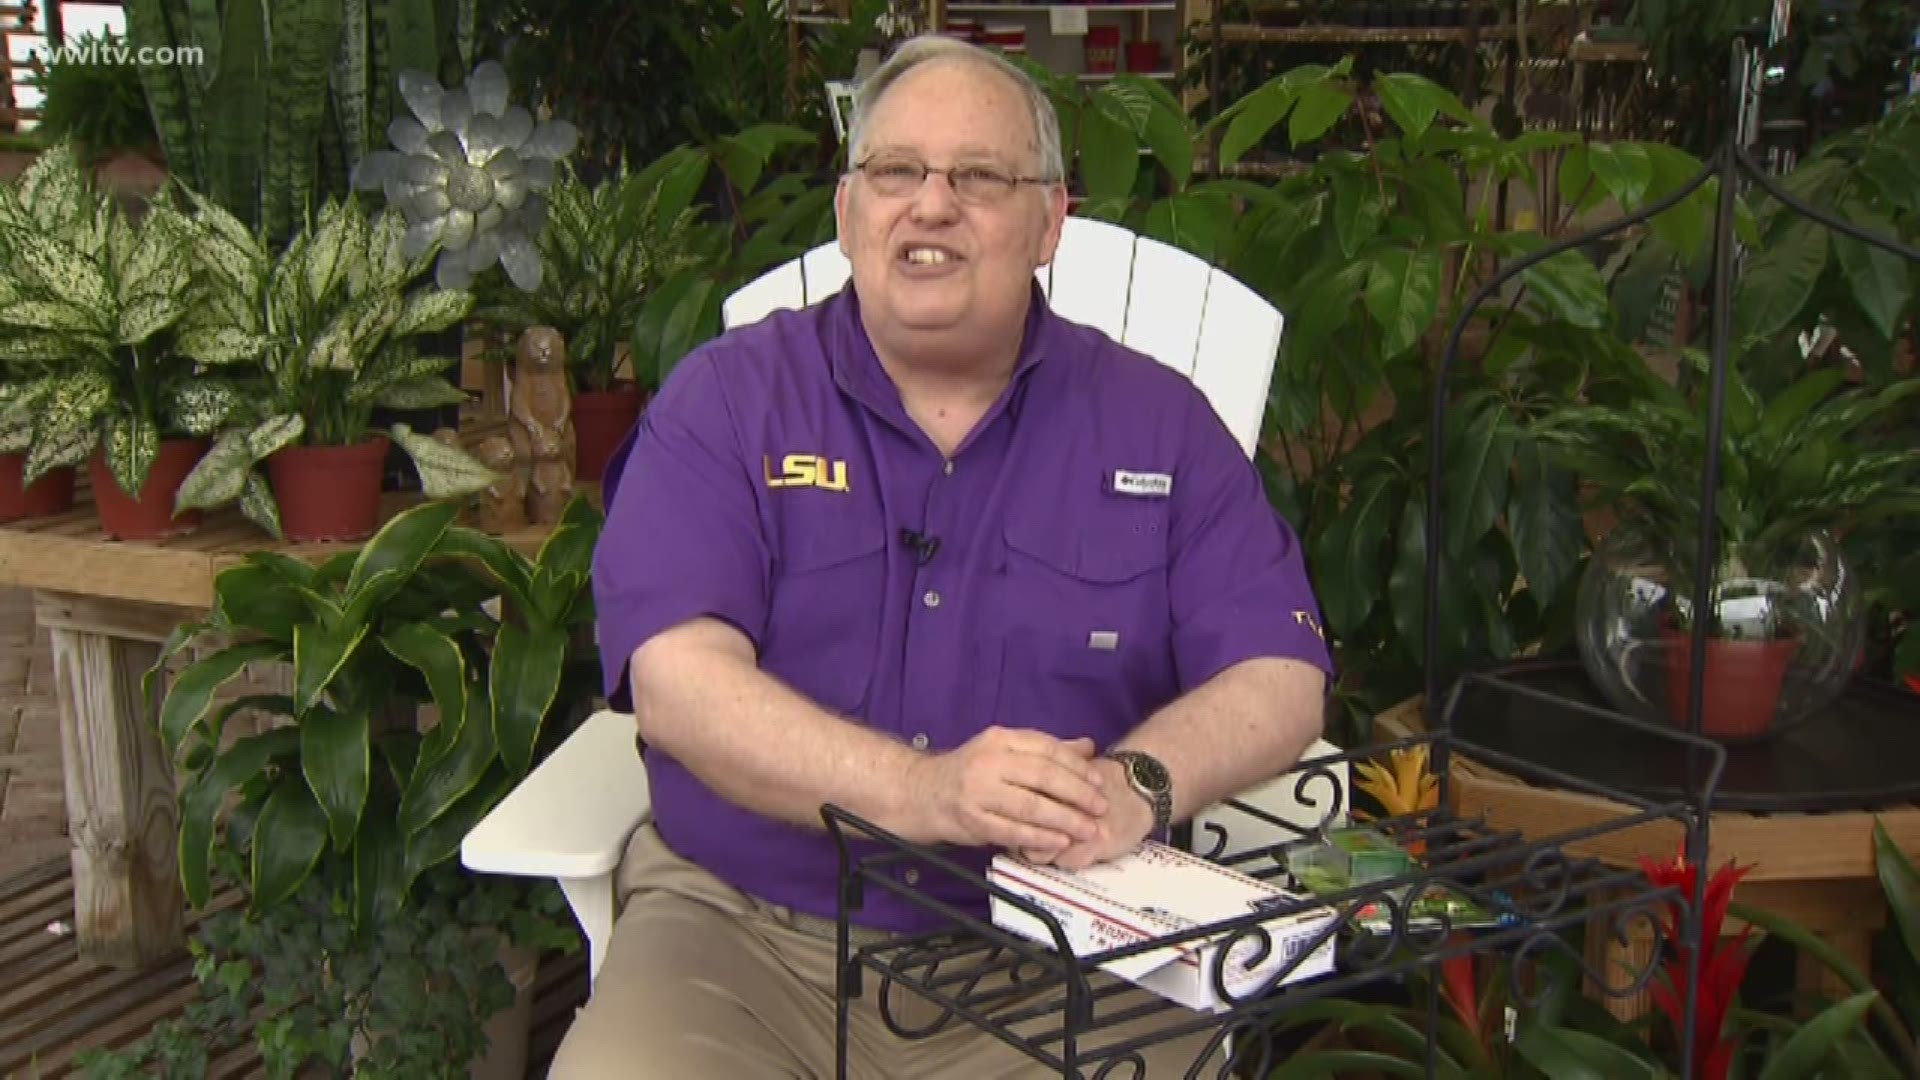 Dan Gill, LSU Agricultural Center Horticulturist, explains the why you should get your soil tested and how.